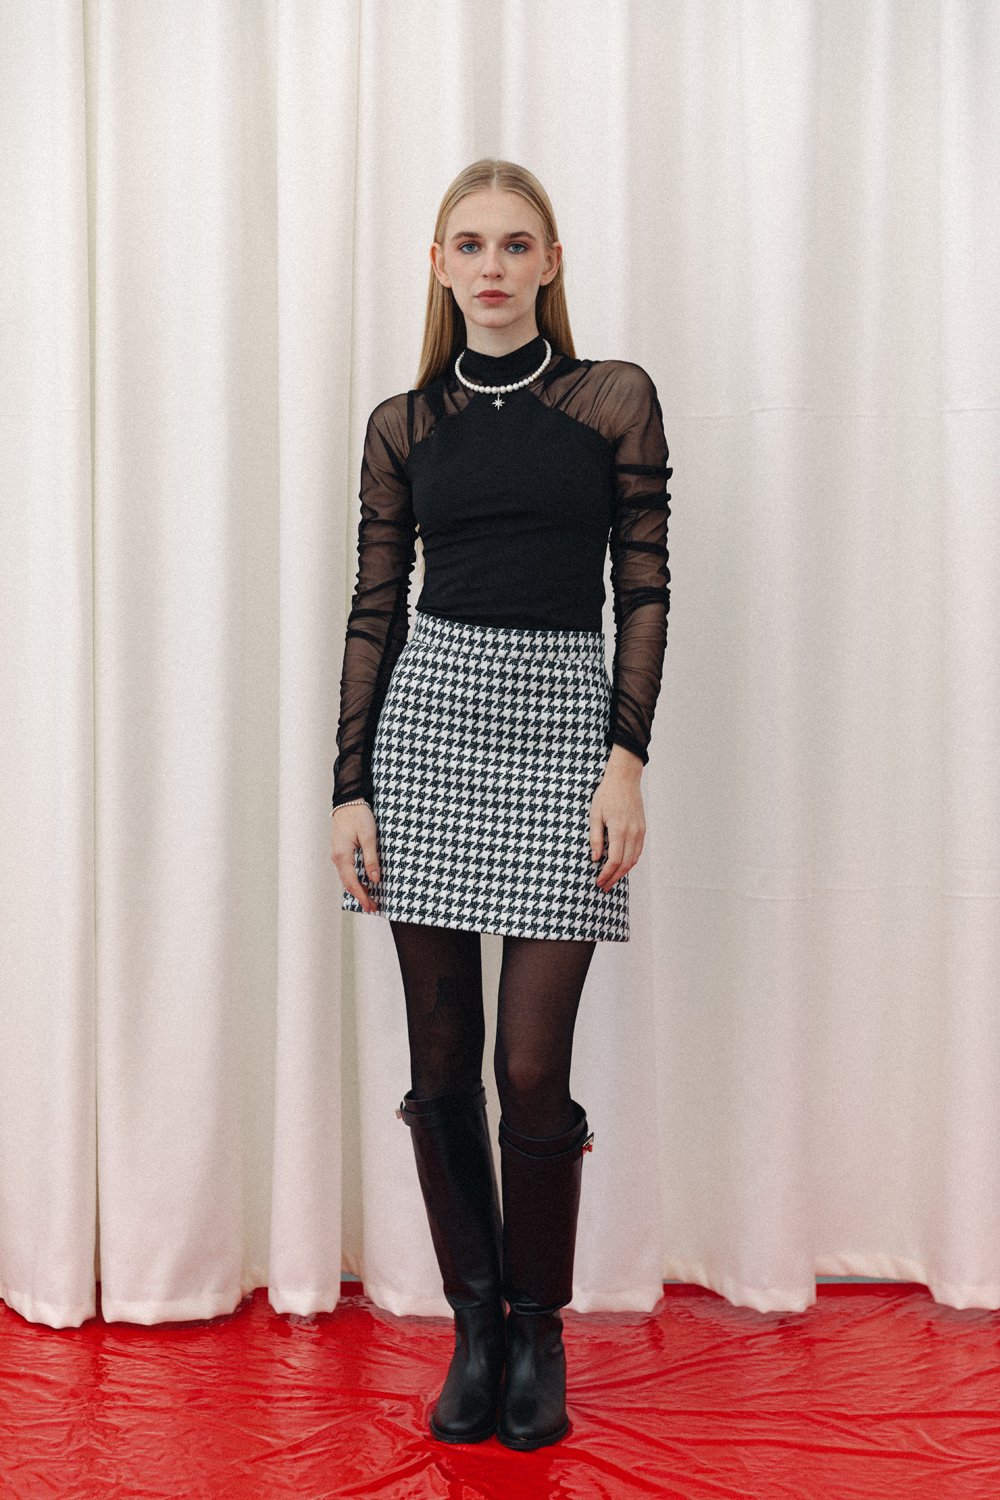 A-line skirt with houndstooth print